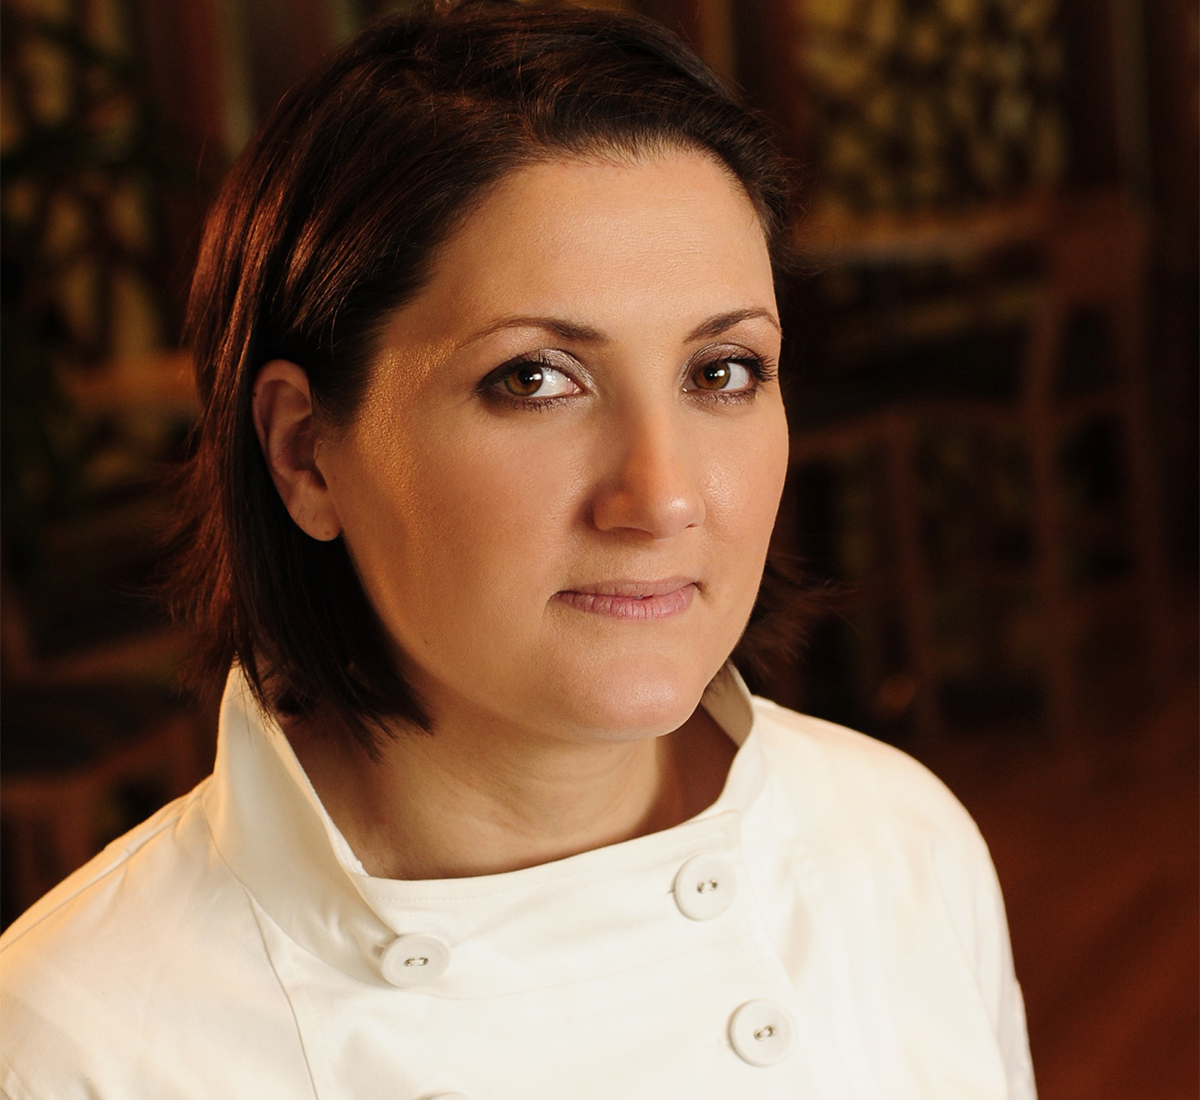 Chef Rachel Klein of Liquid Art House, which opens on May 6. Photo courtesy of Liquid Art House.